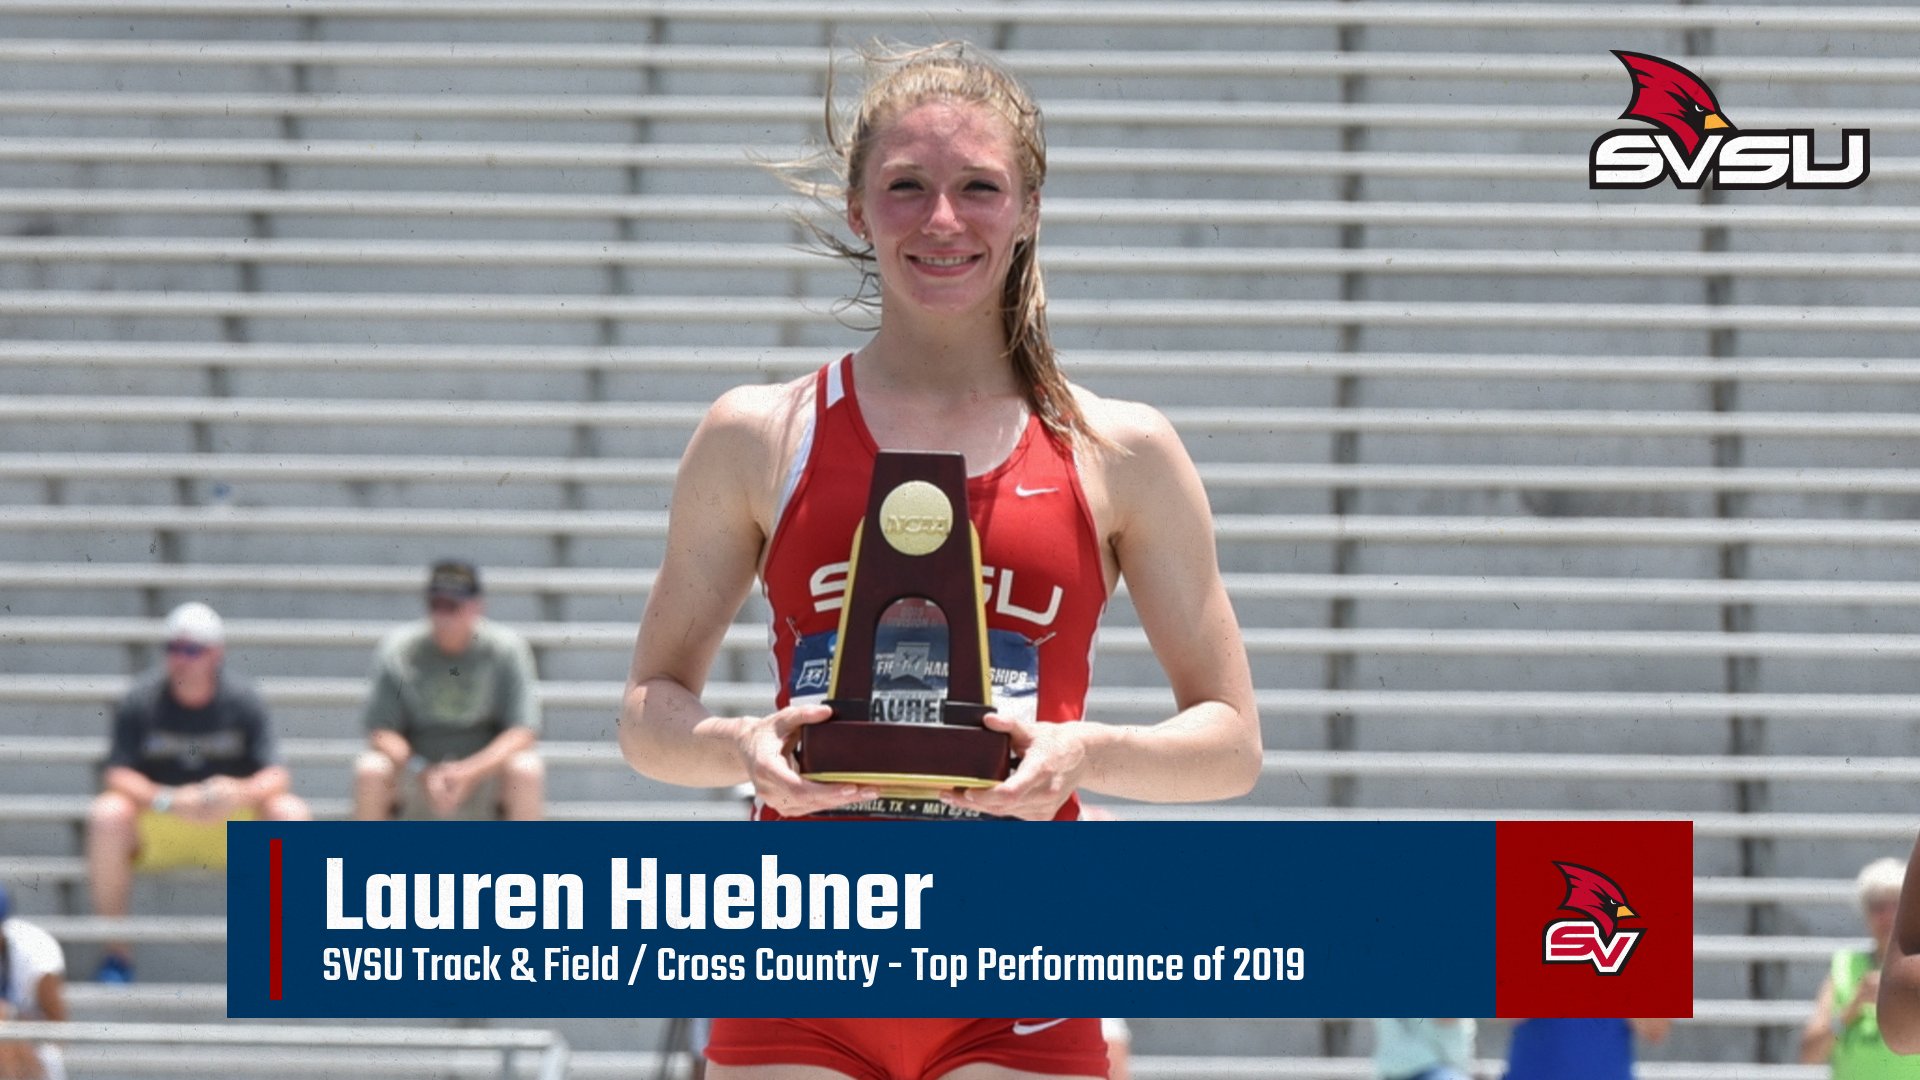 SVSU Track & Field and Cross Country Performances of the Decade - 2019